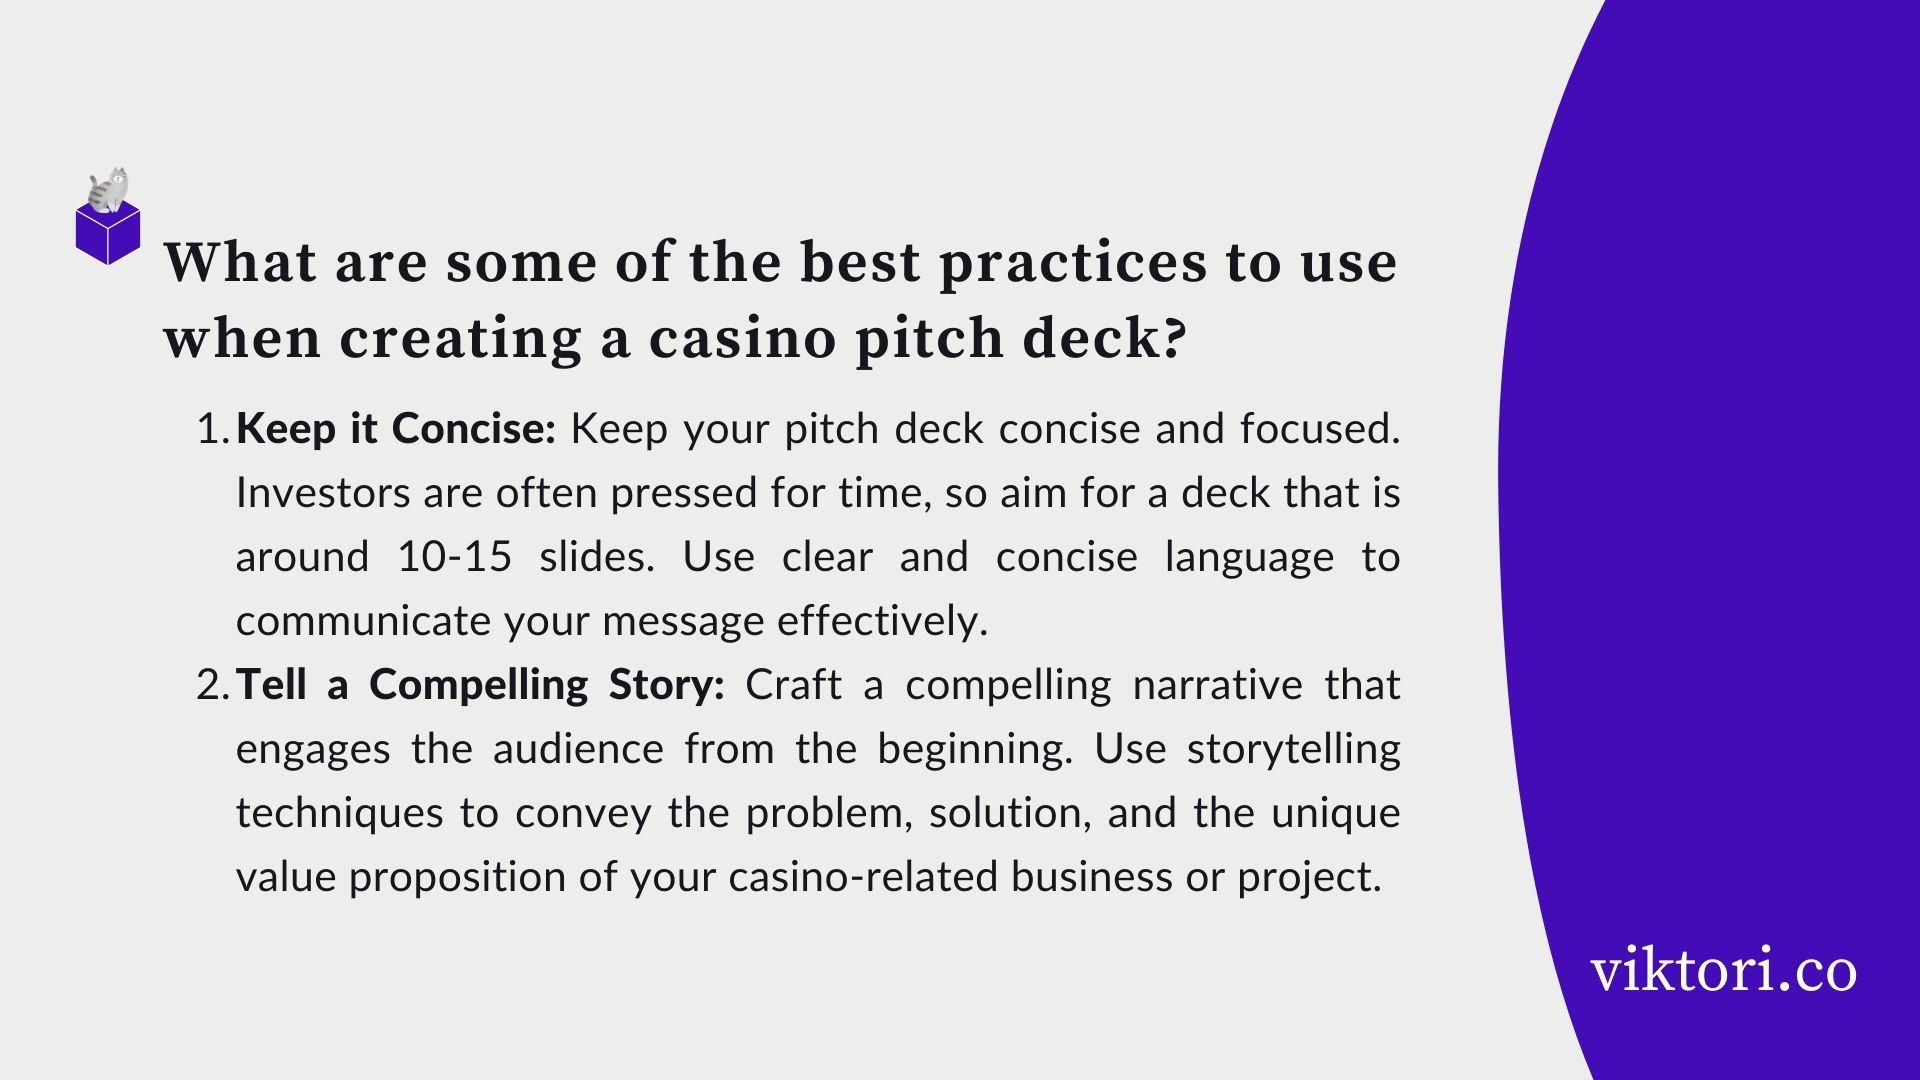 casino pitch deck tips and practices